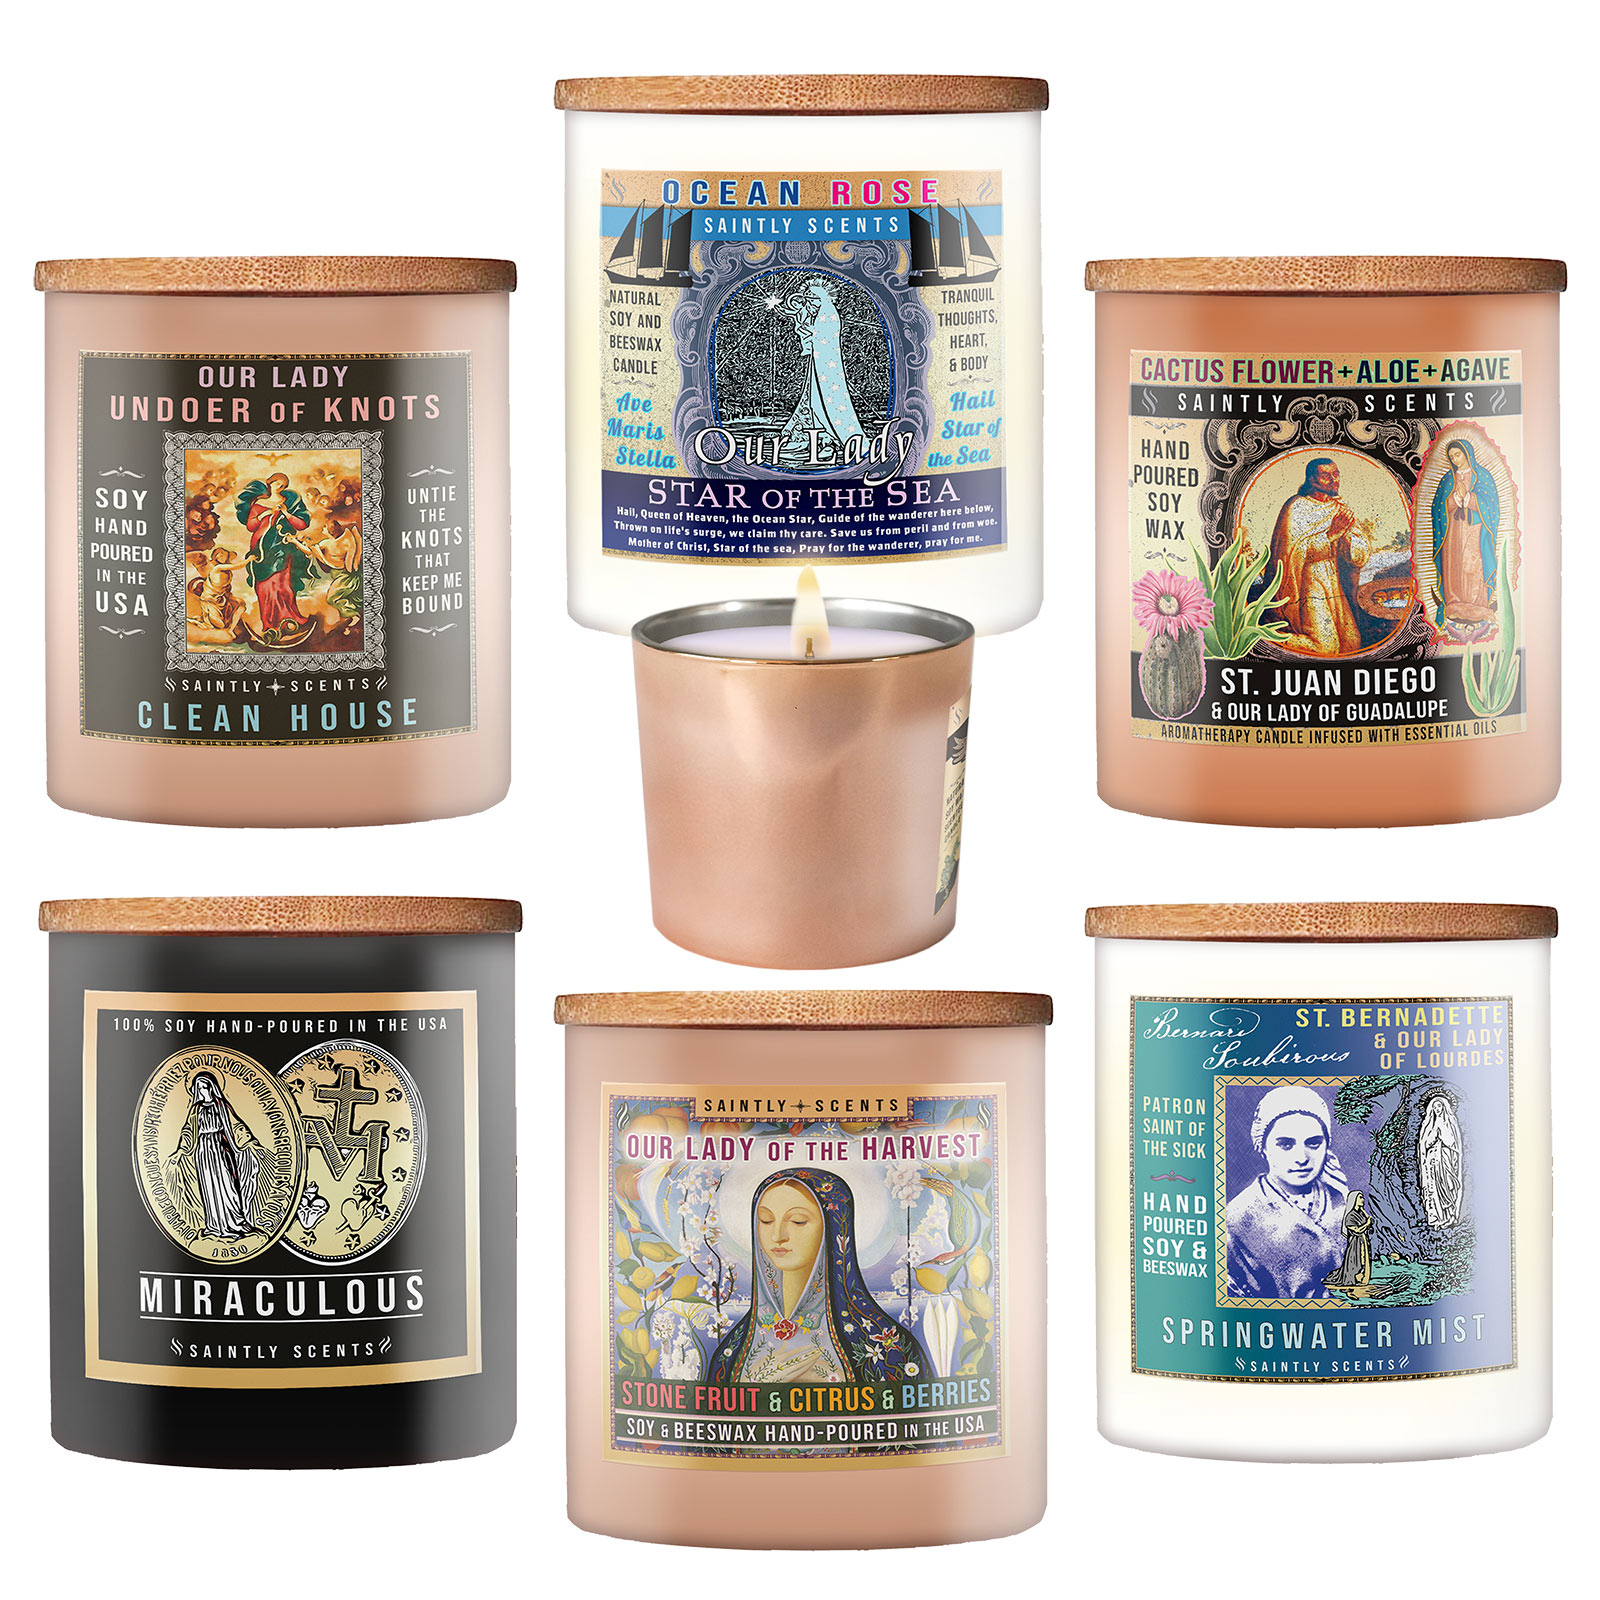 Scented Prayer Candles